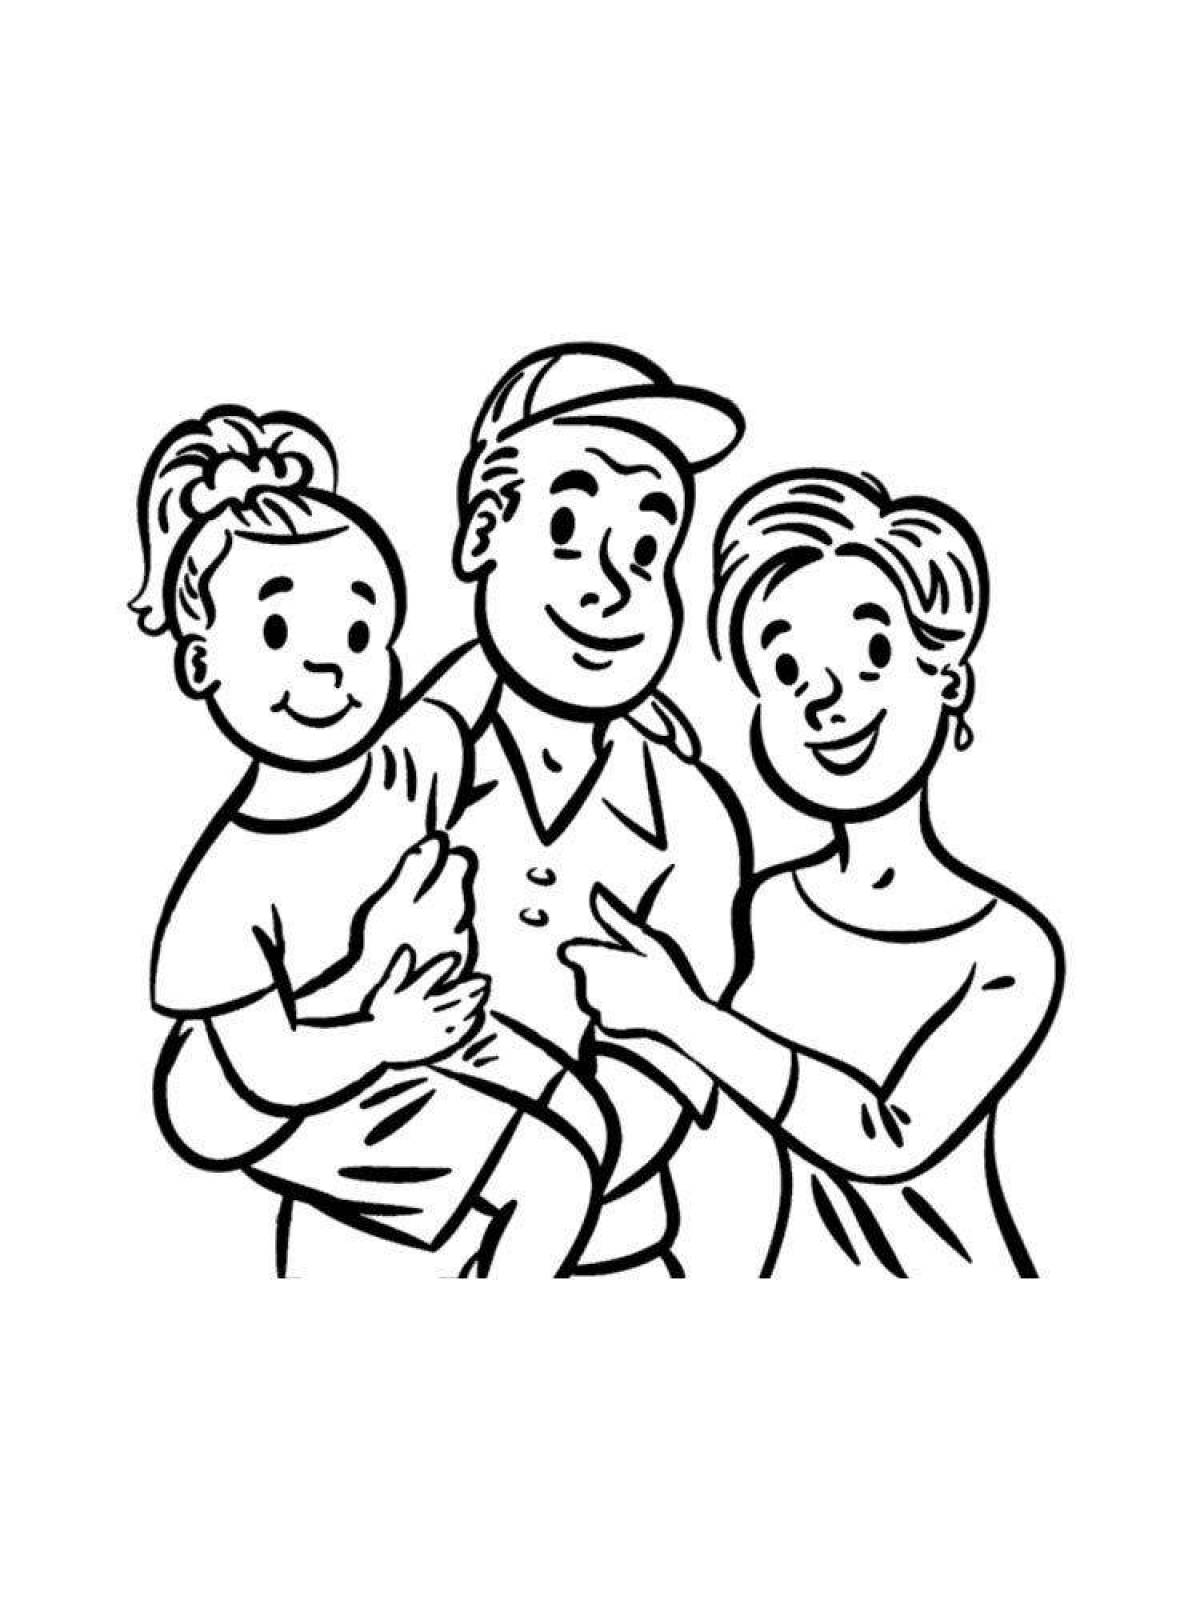 Nice mom and dad coloring pages